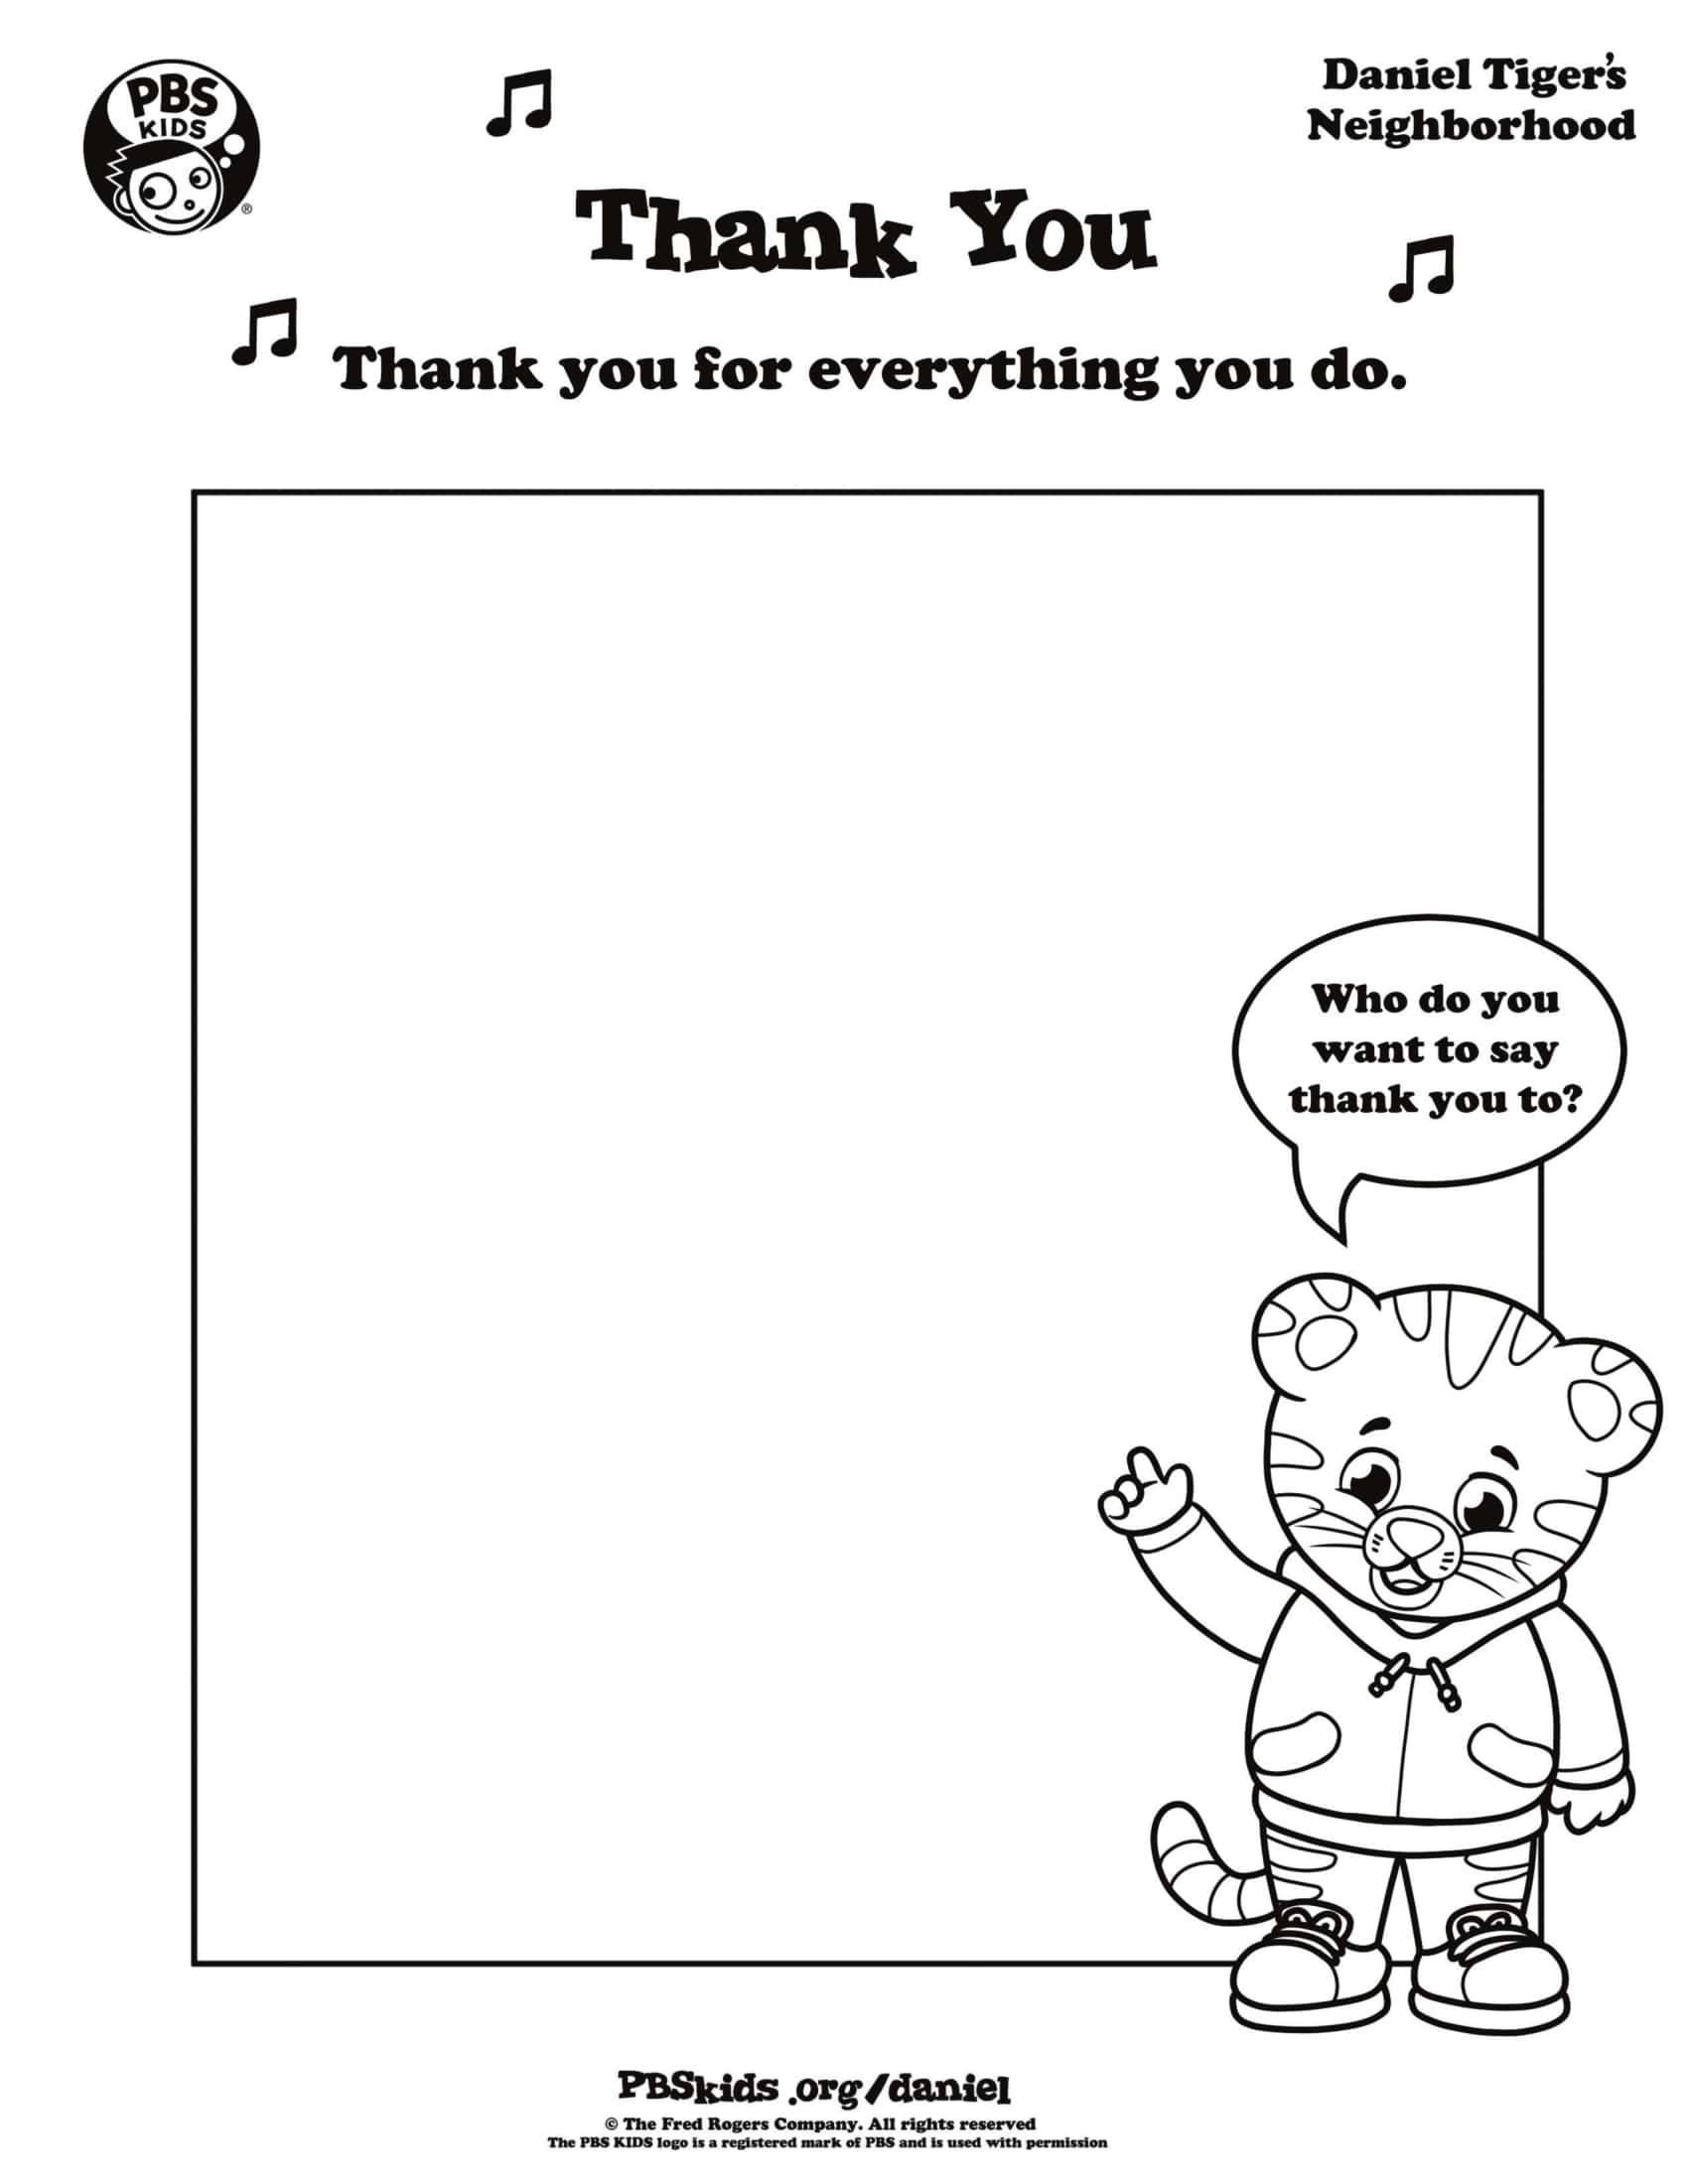 Thank You Daniel Tiger Min Coloring Page